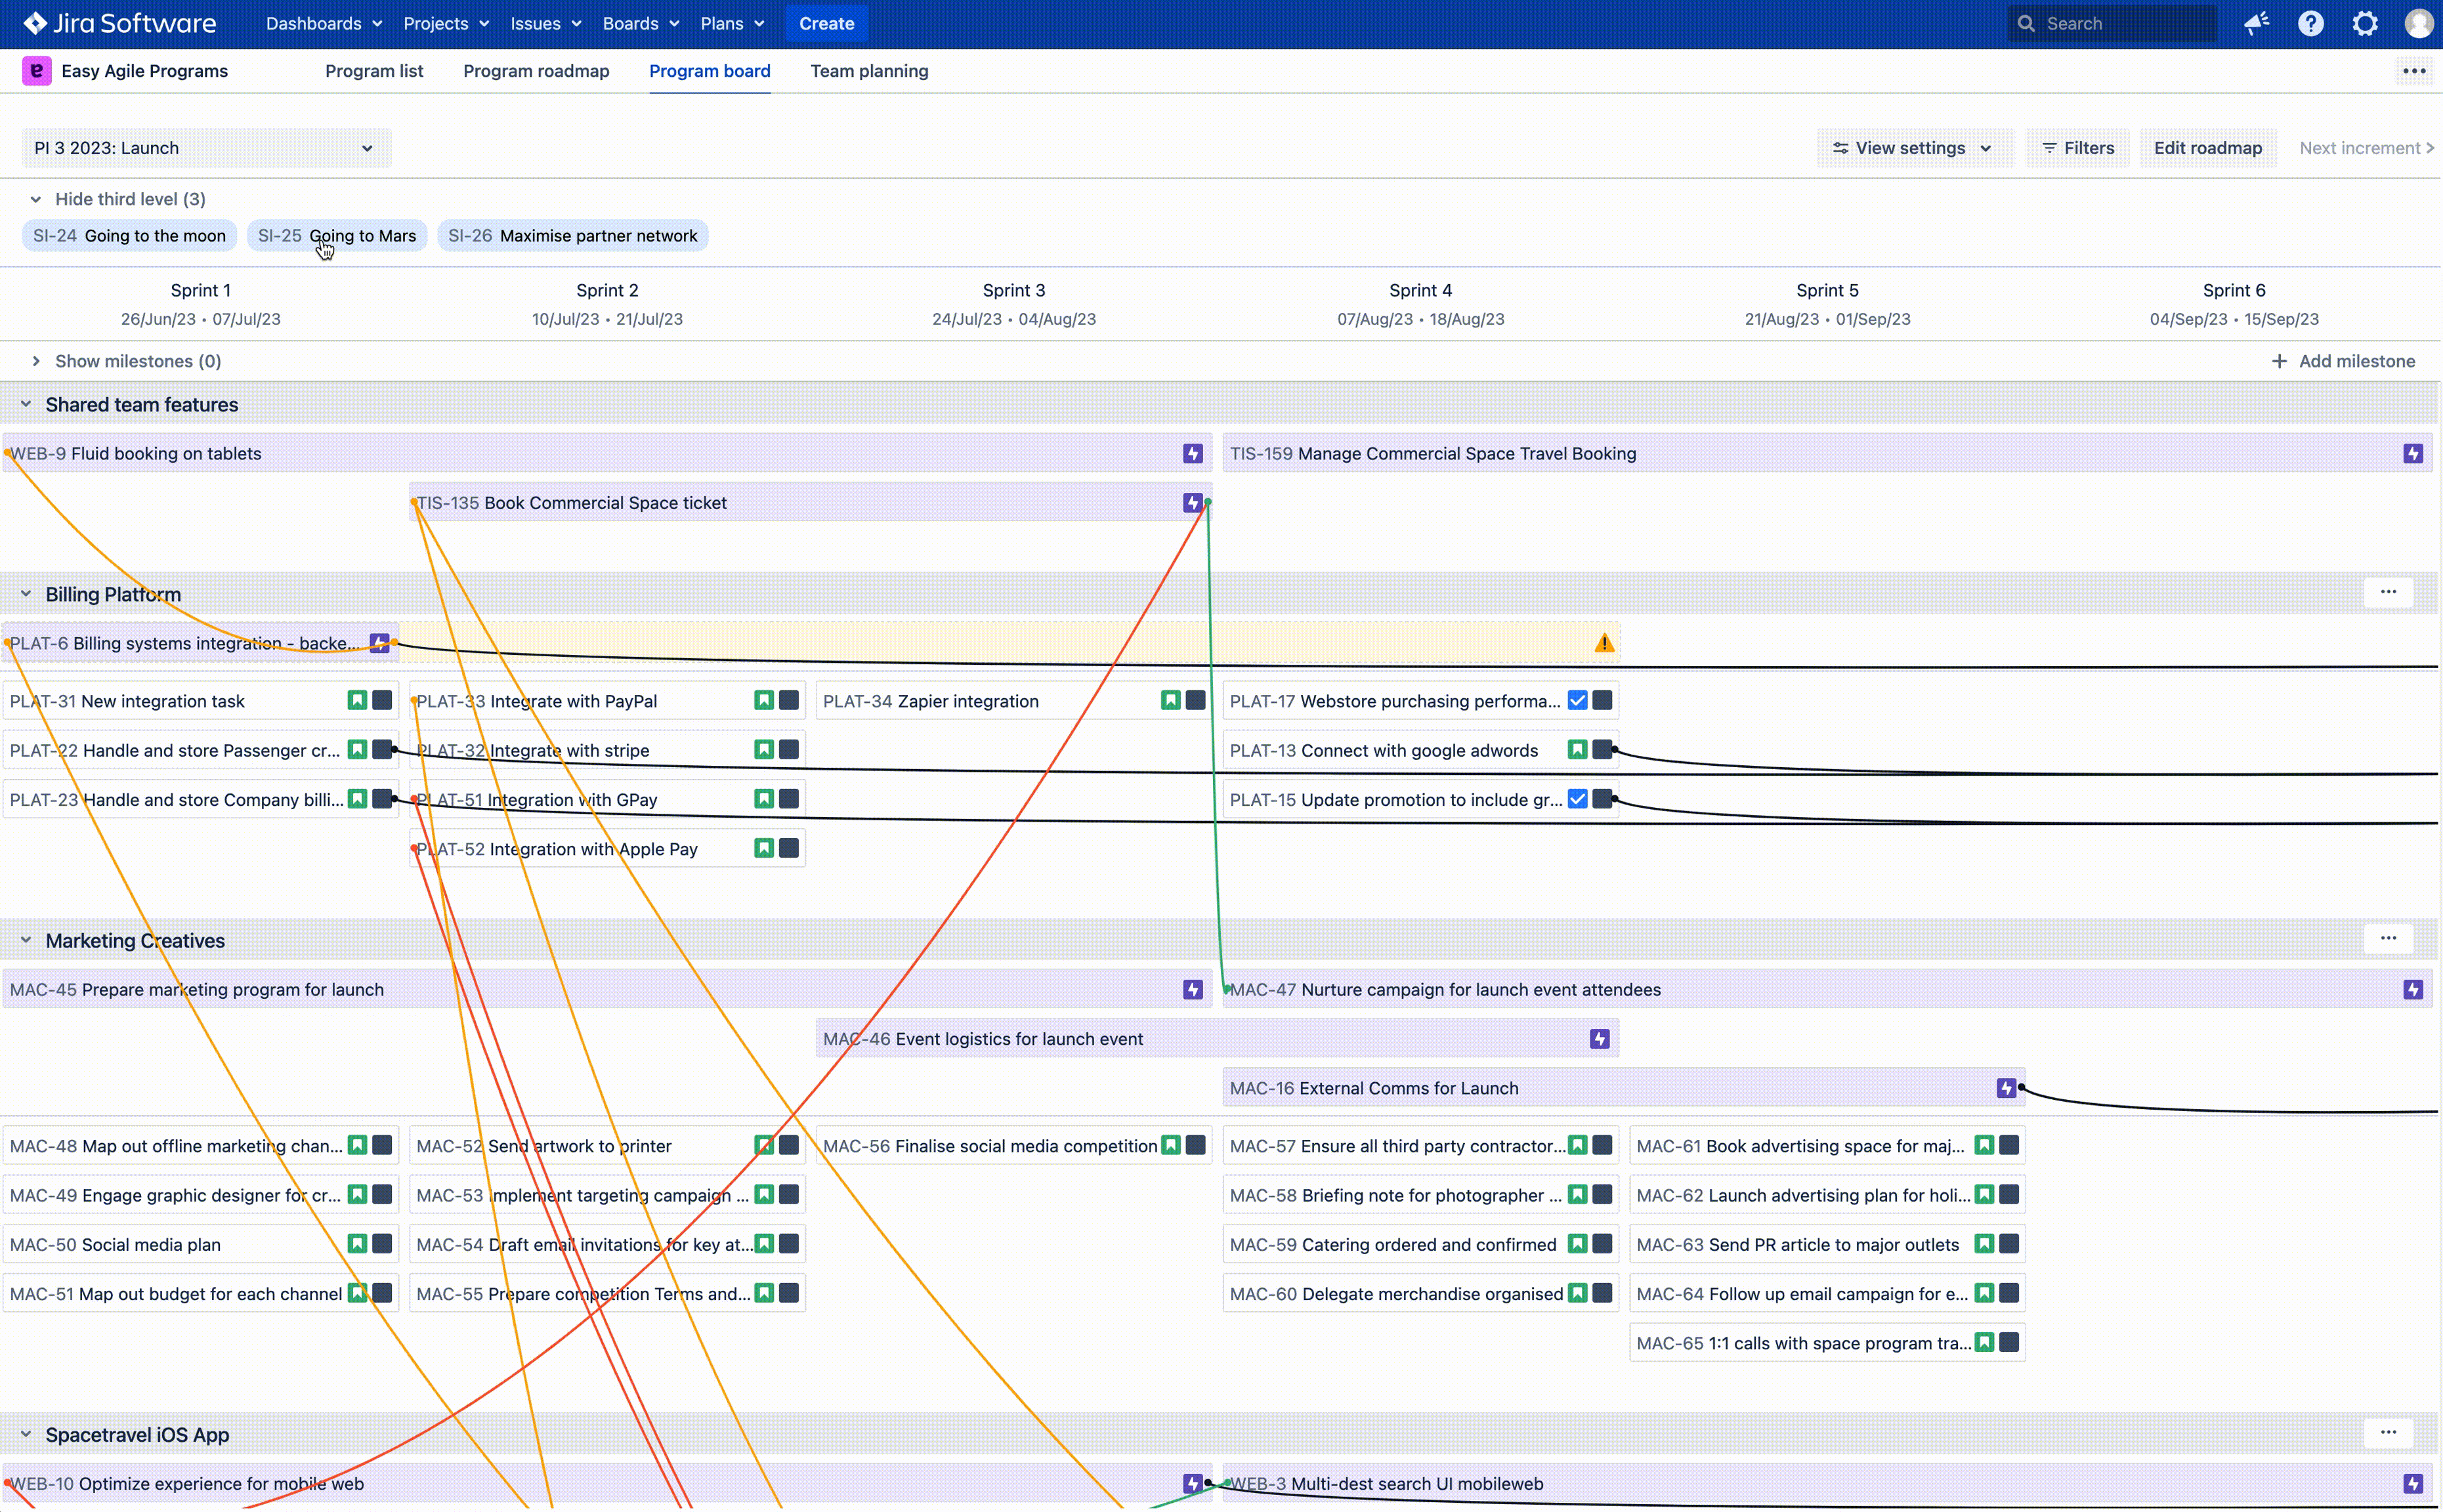 Screenflow of the Program Board being filtered by third level hierarchy